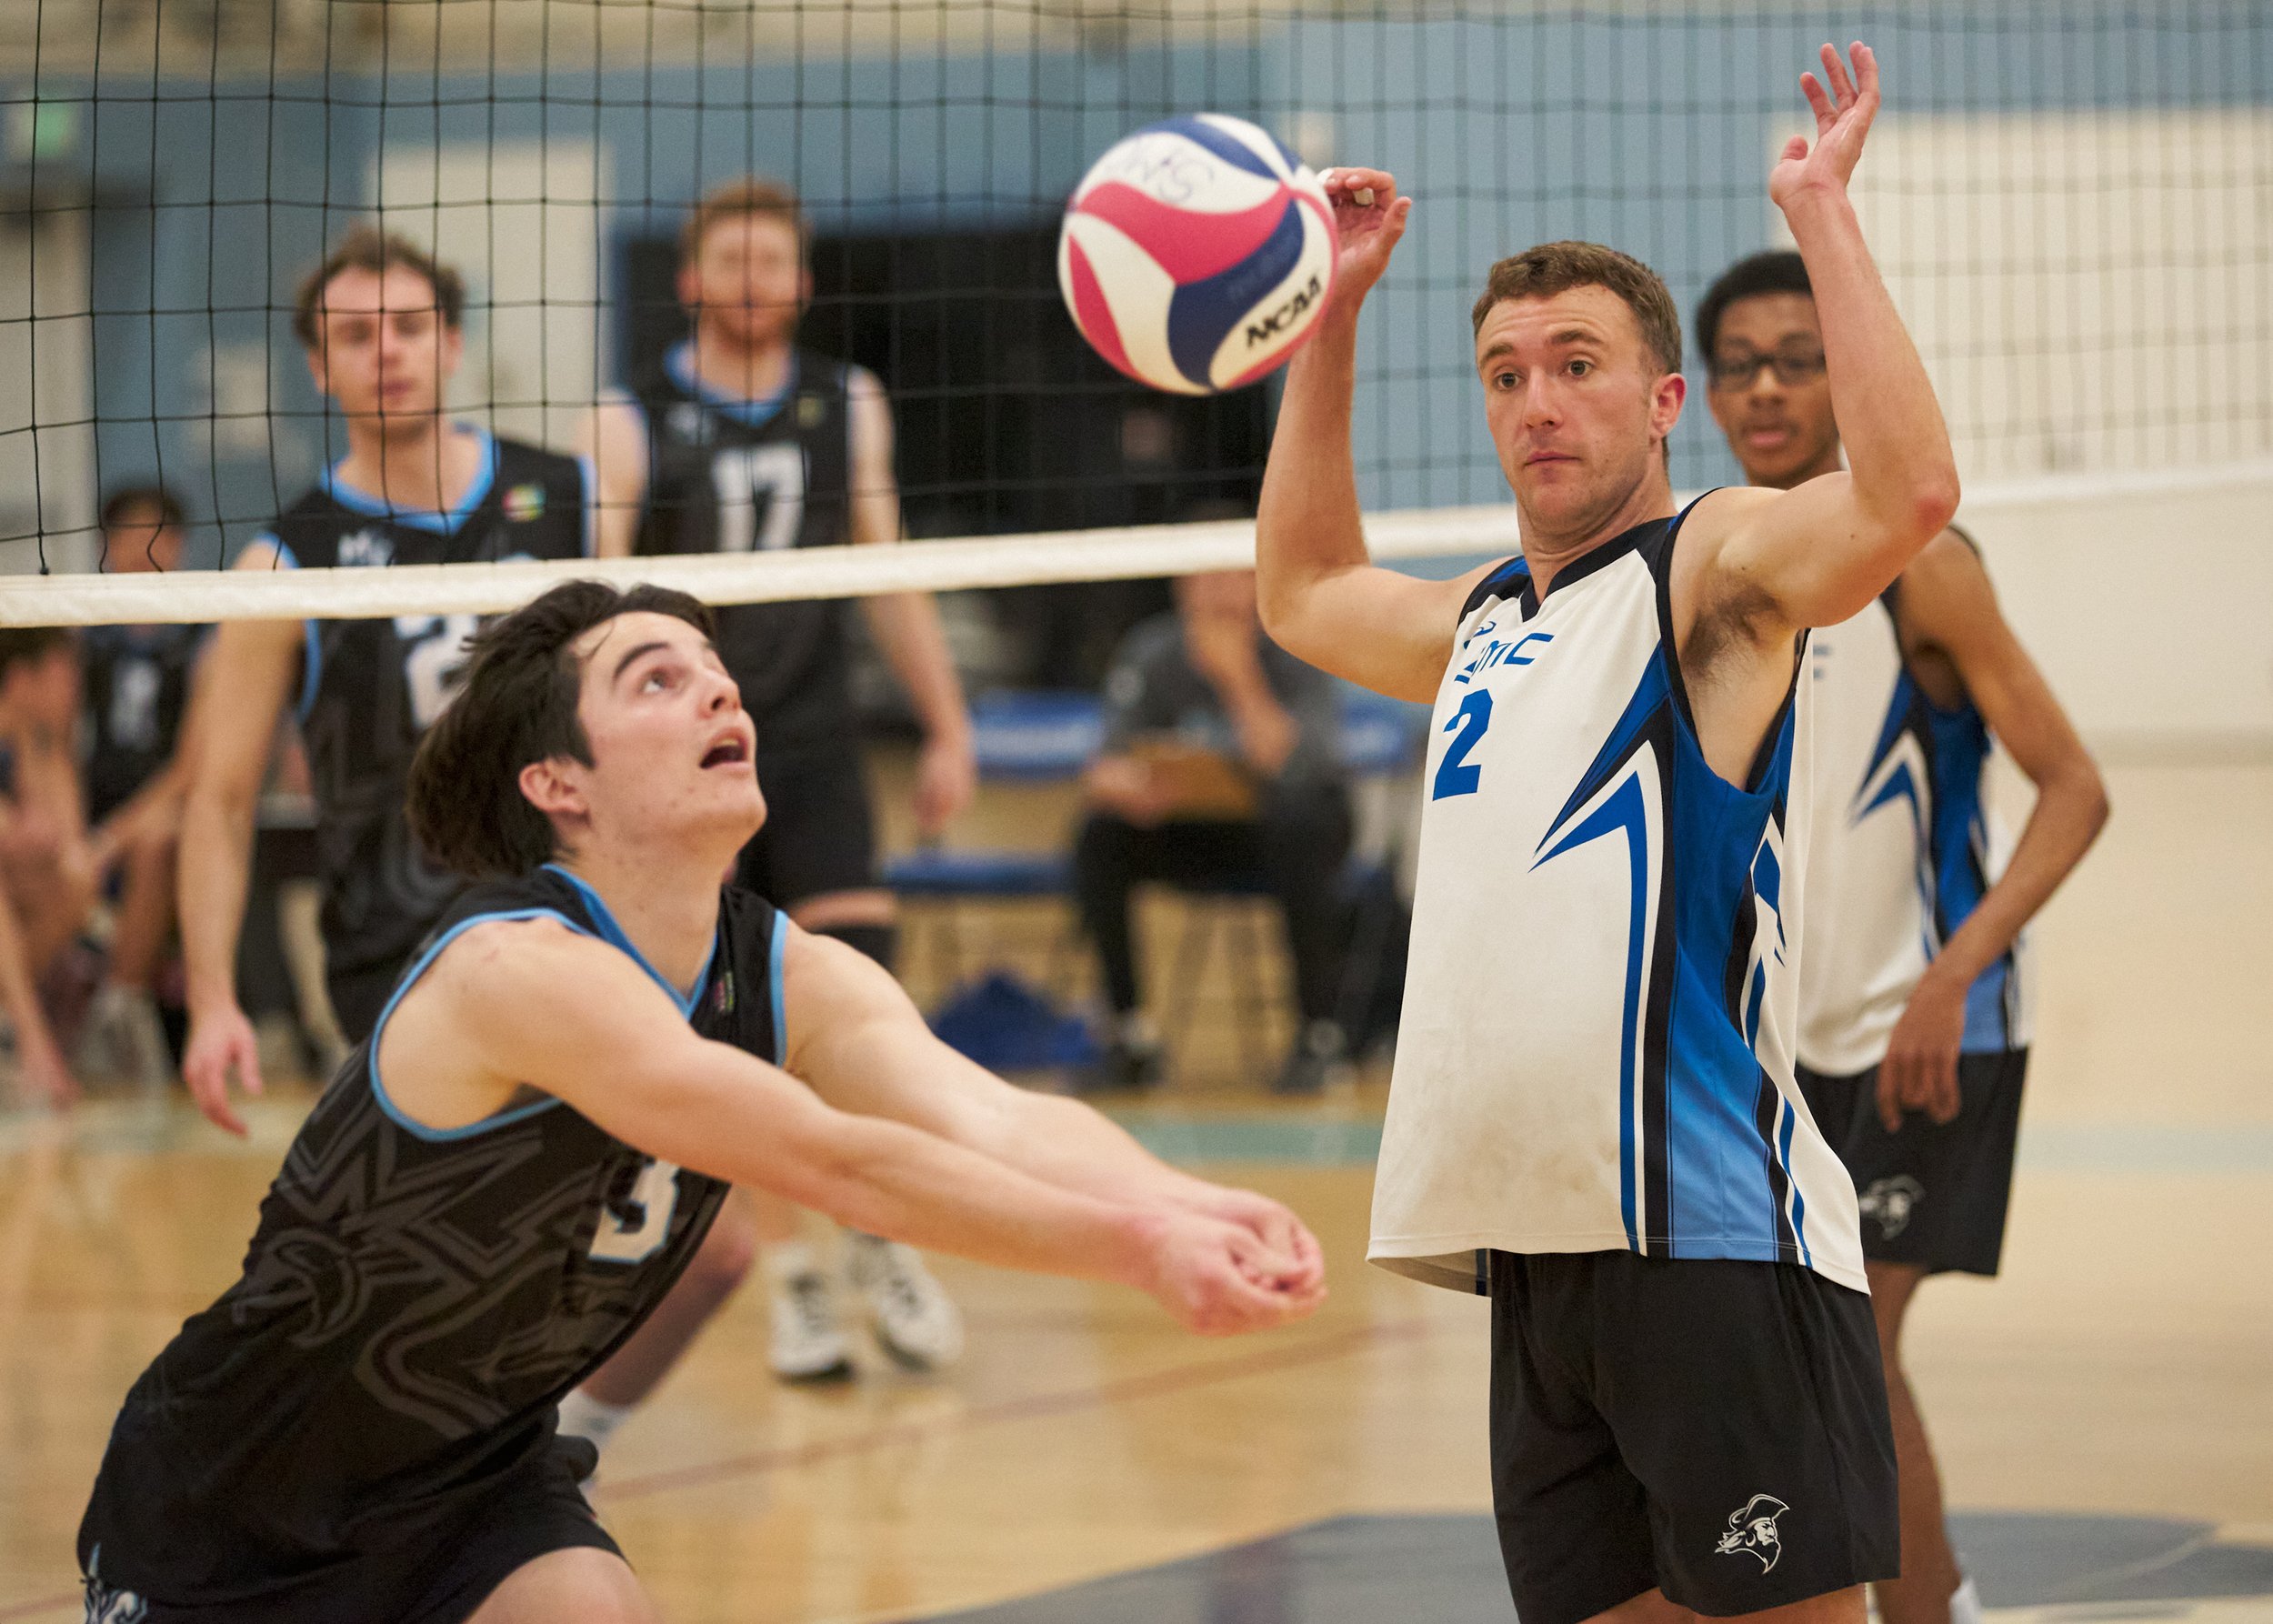  Santa Monica College Corsairs' Kane Schwengel (right) gets surprised when Moorpark College Raiders' Garrett Ream (left) follows the ball onto the Corsairs' side of the court during the men's volleyball match on Wednesday, April 12, 2023, at Corsair 